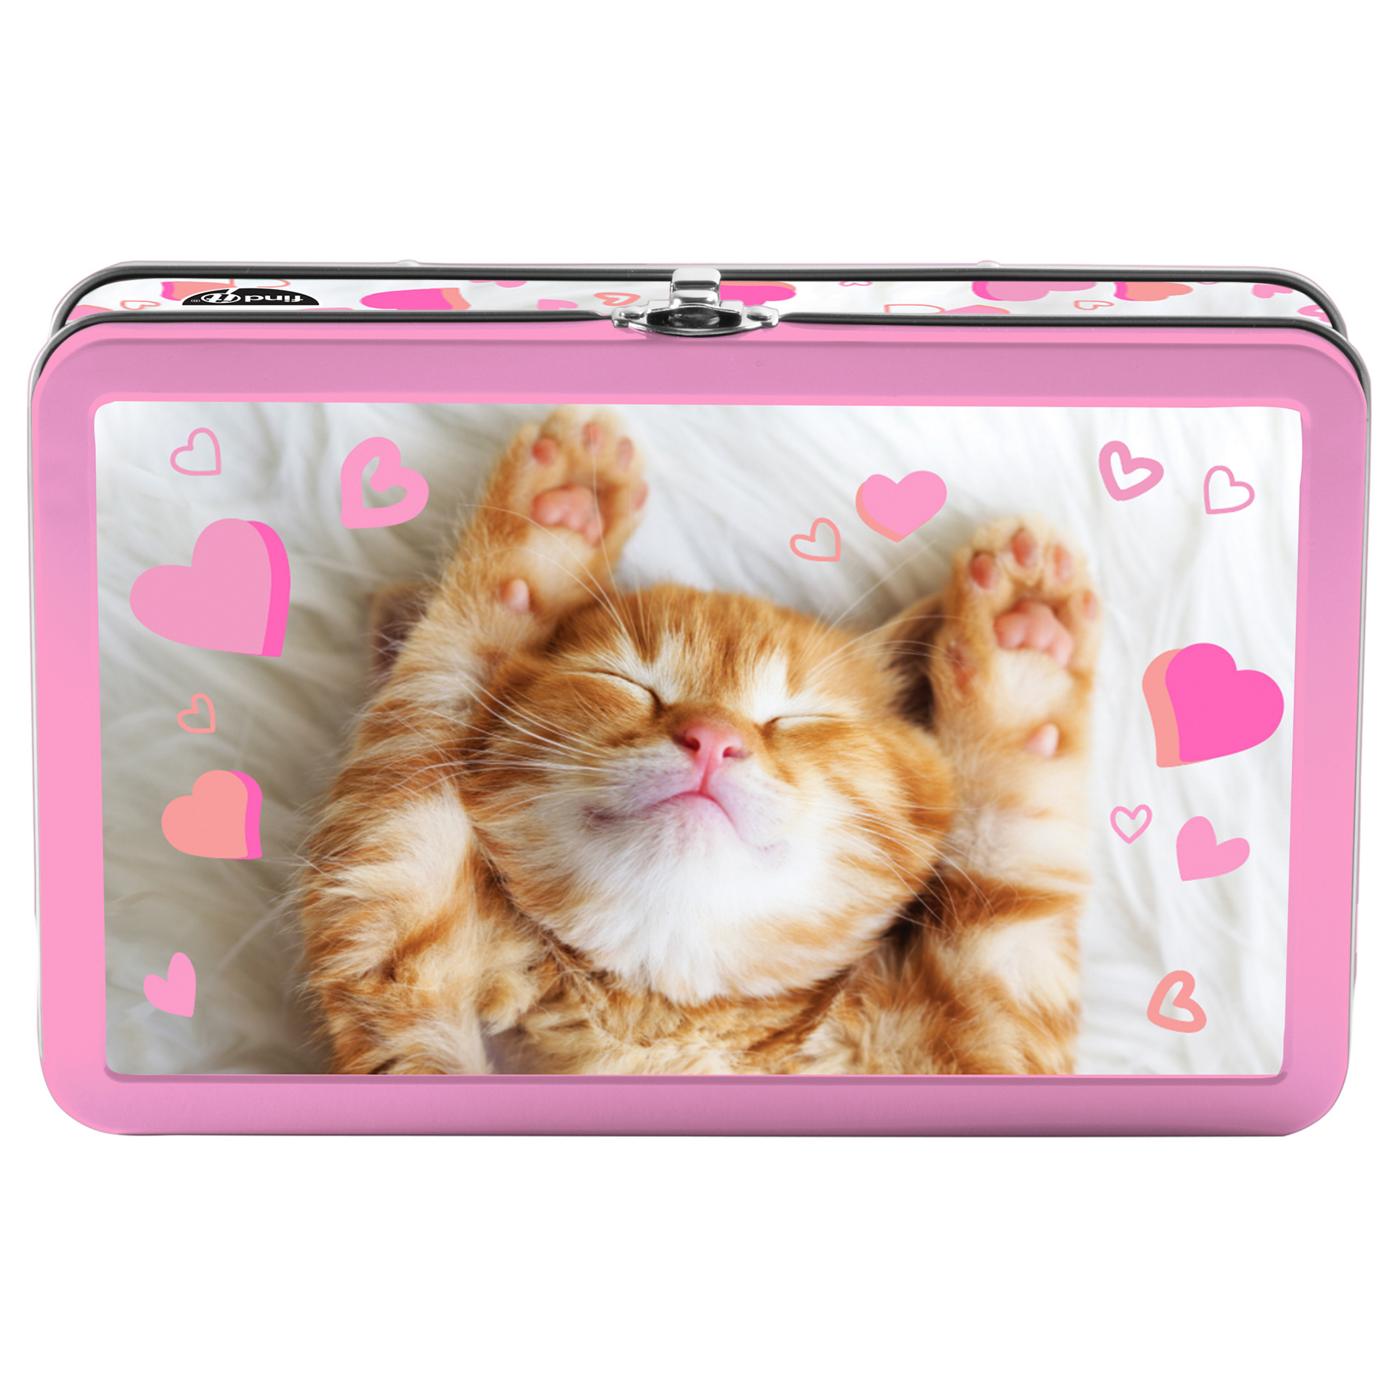 Find It Tin Pencil Box - Love Kitty; image 1 of 3